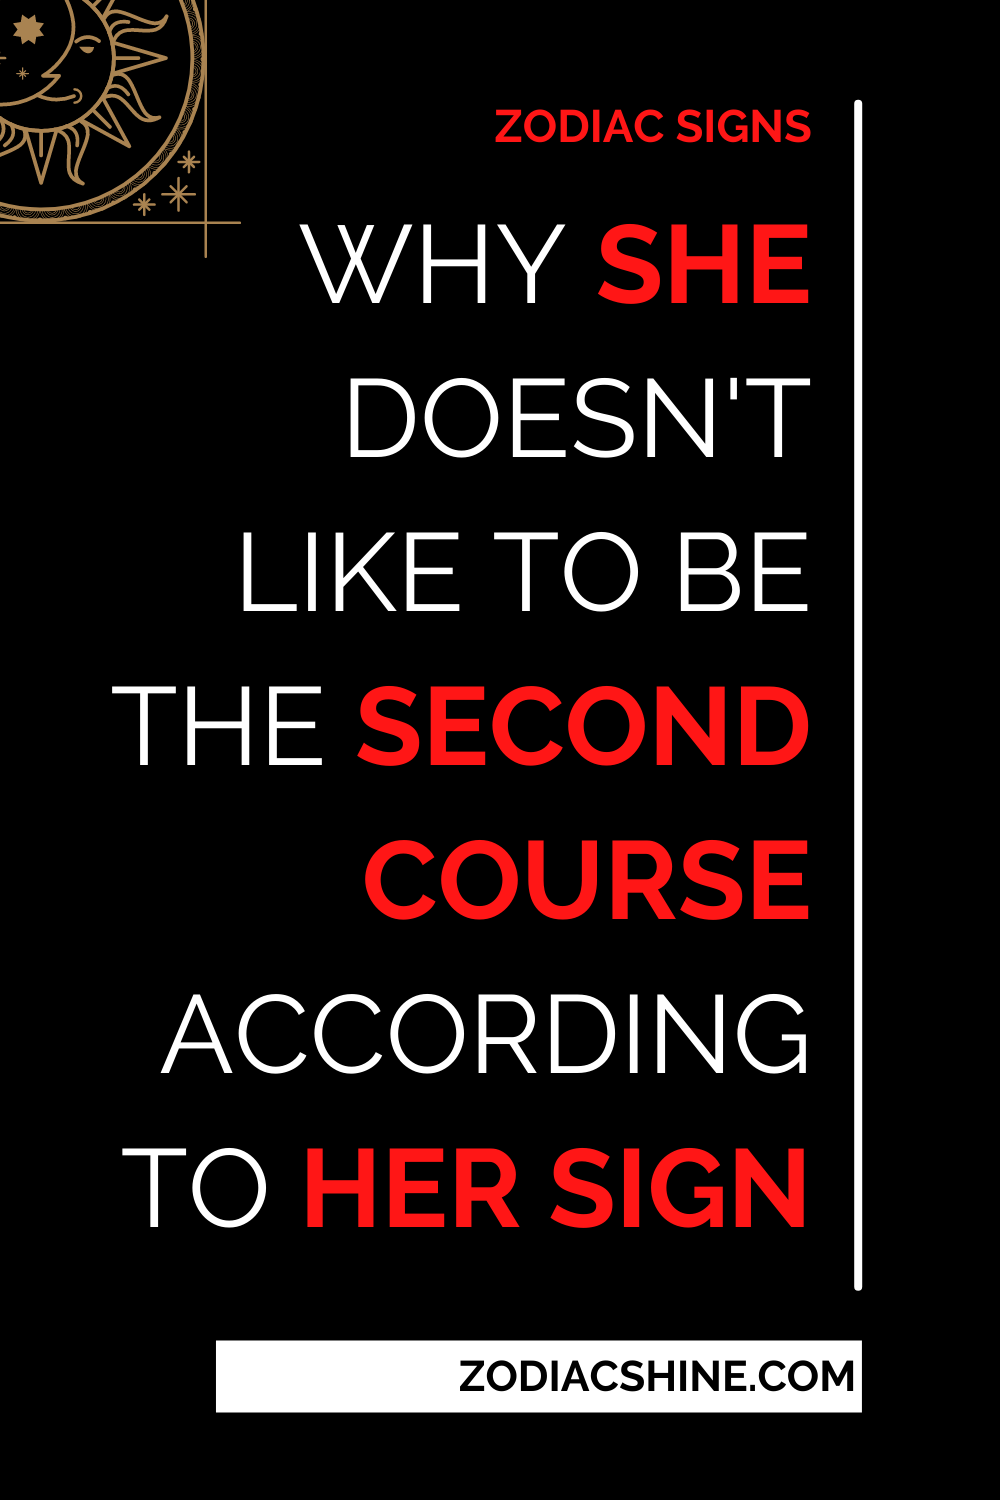 Why She Doesn't Like To Be The Second Course According To Her Sign